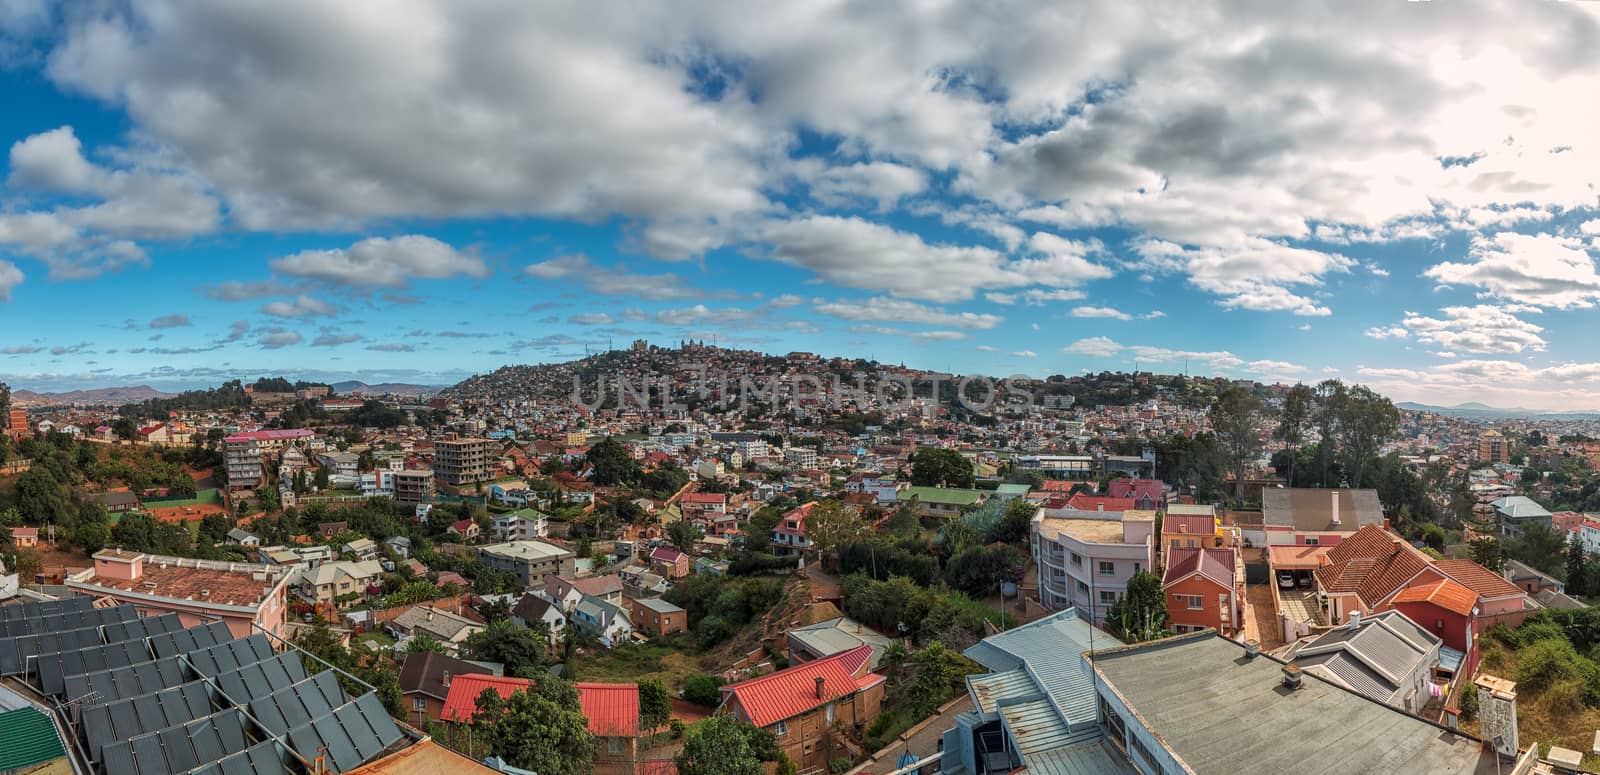 Densely packed houses on the hills of Antananarivo by derejeb